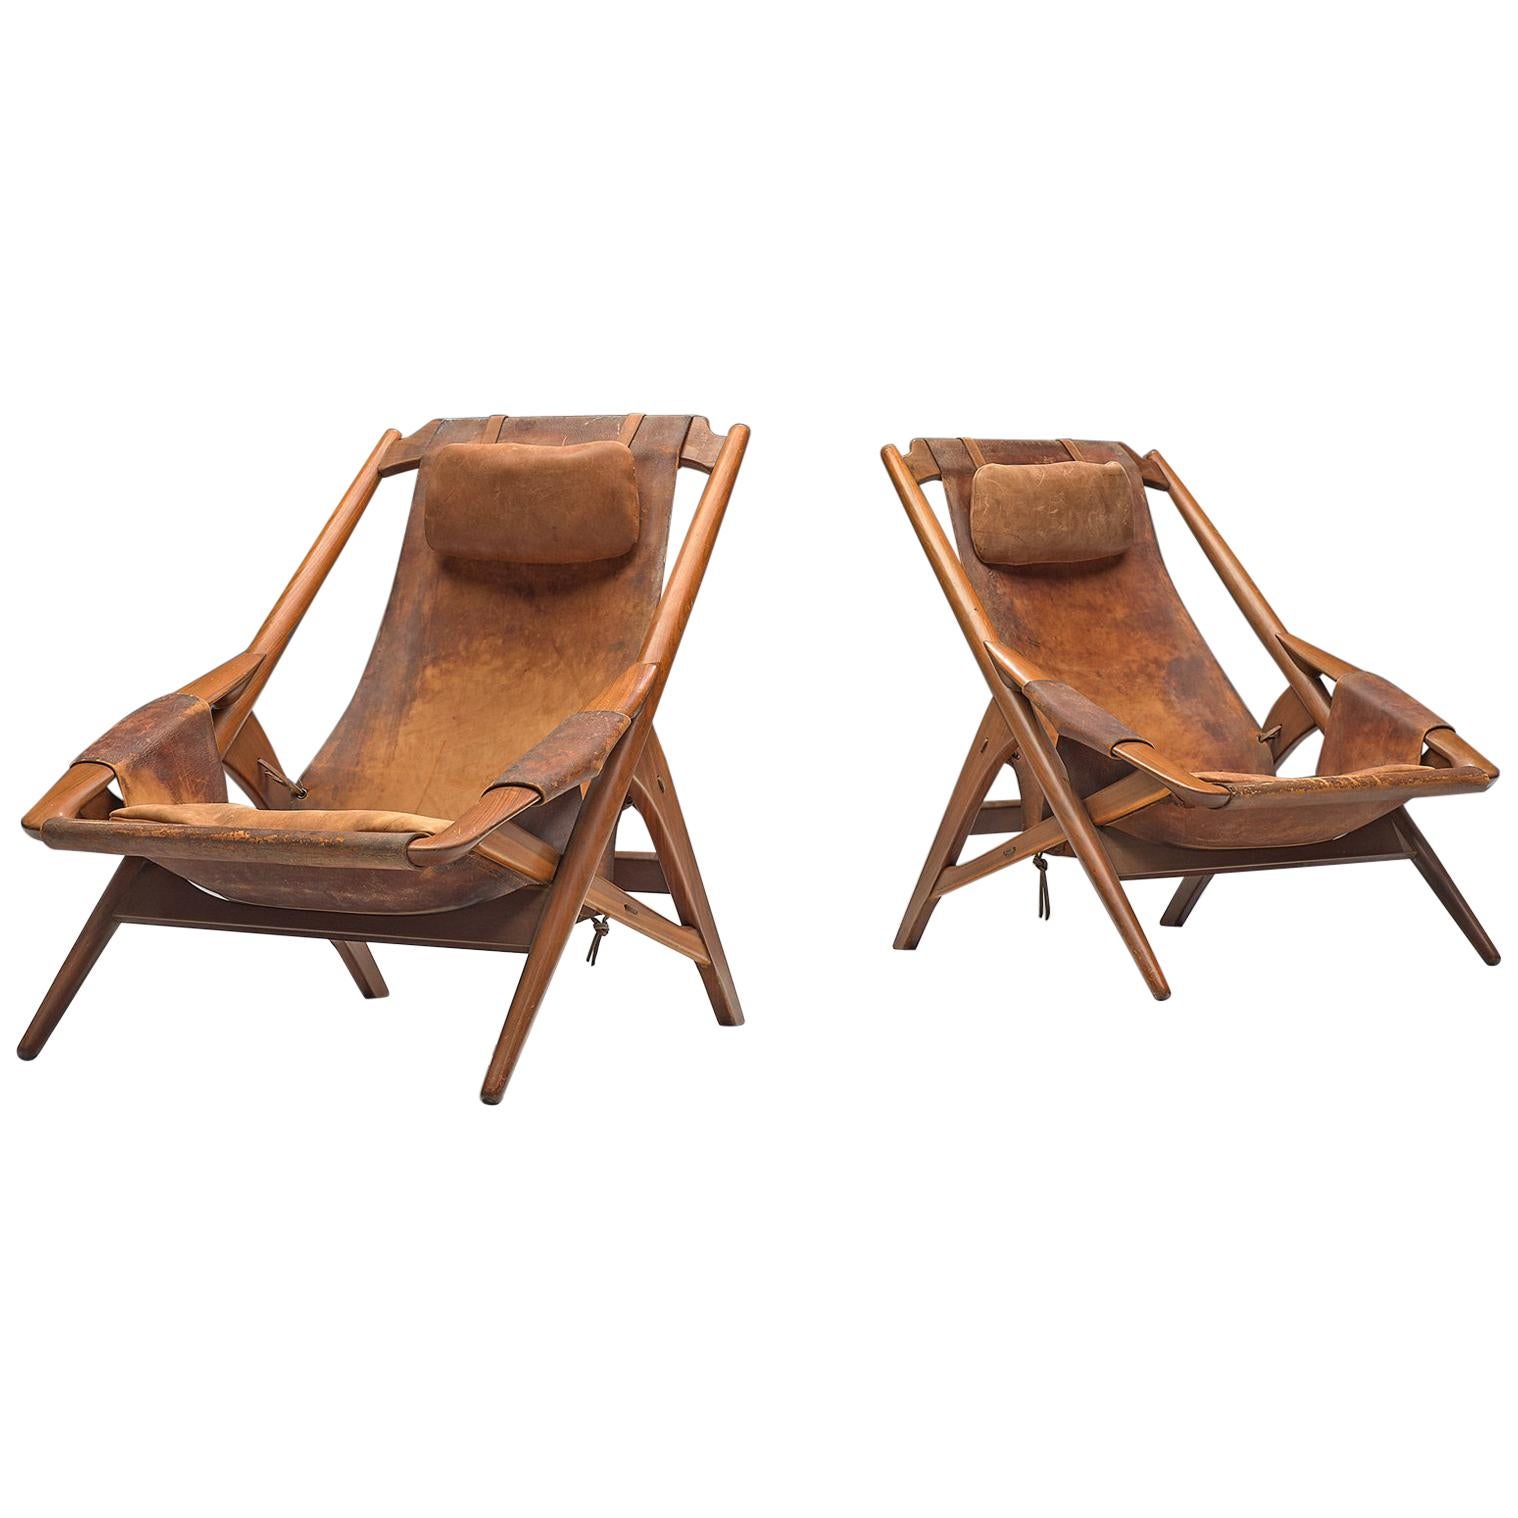 Andersag Pair of Lounge Chairs in Patinated Cognac Leather